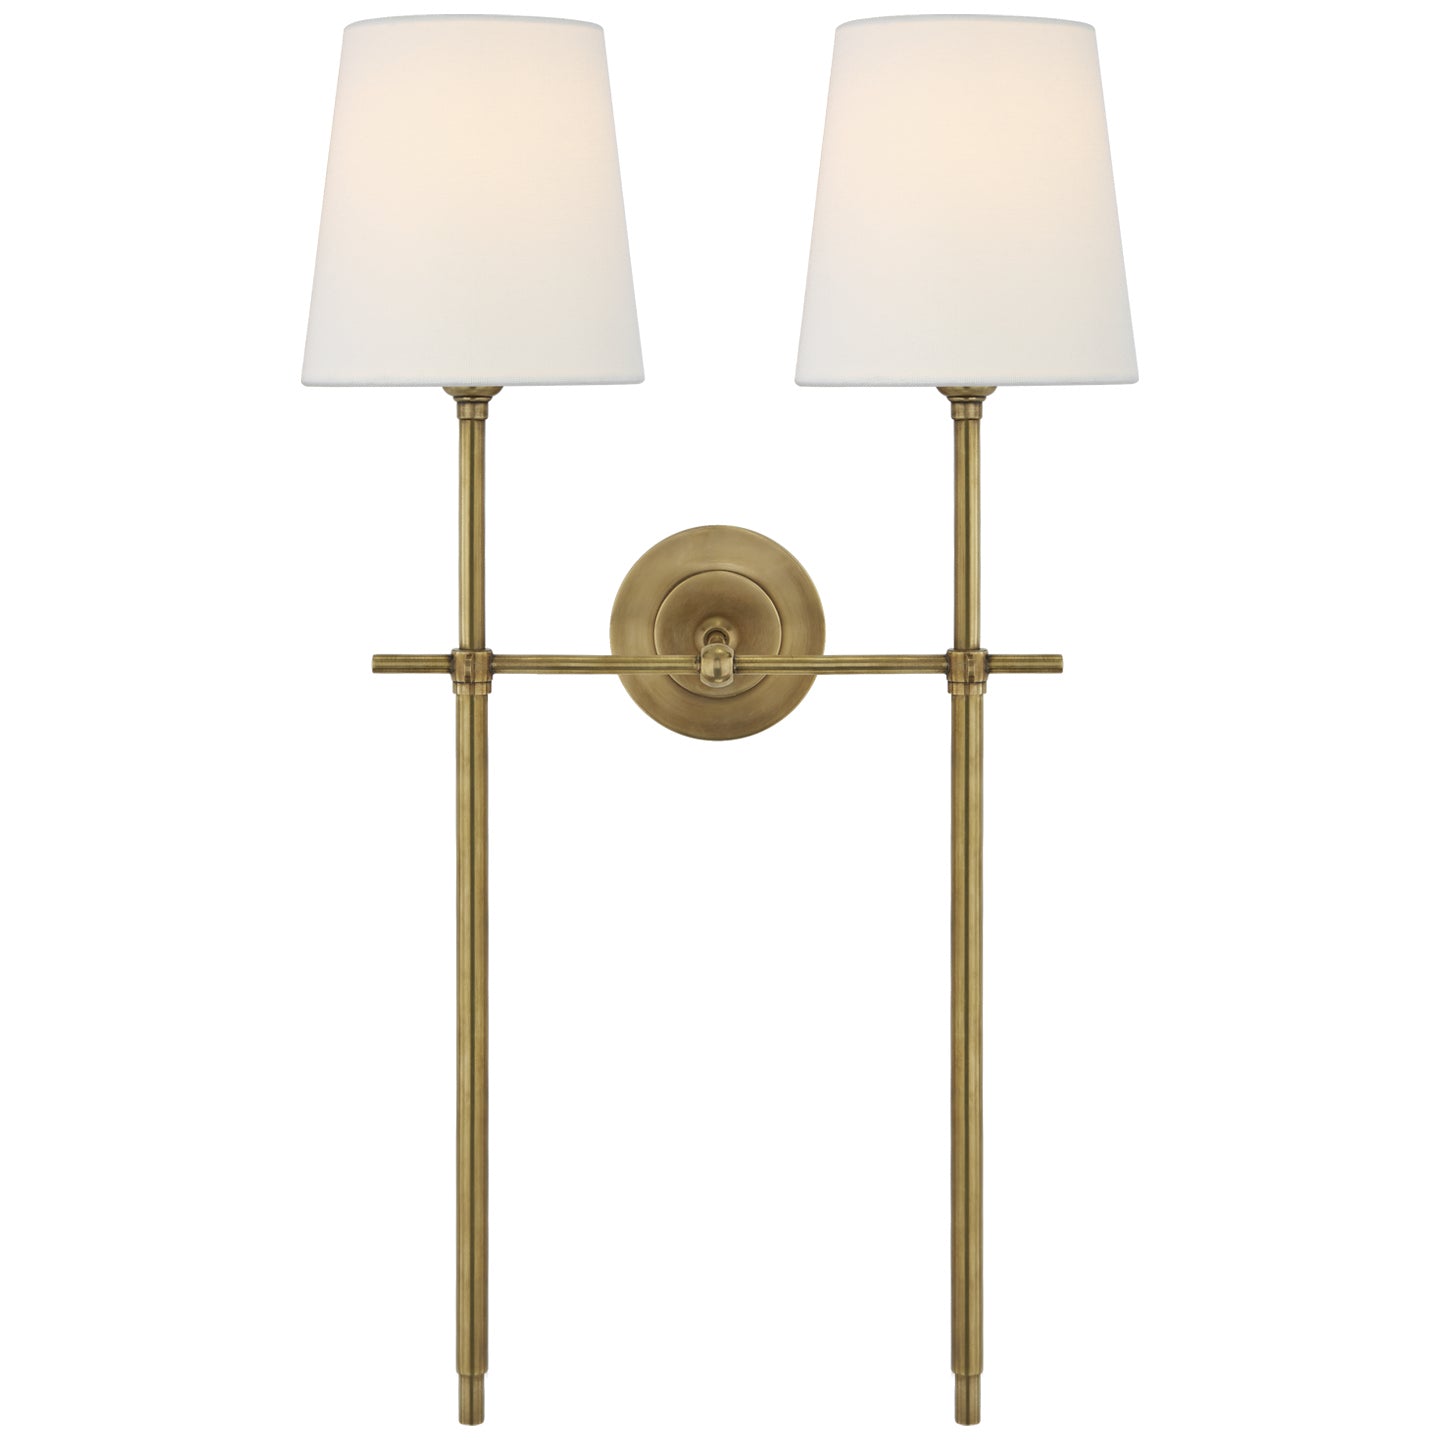 Visual Comfort Signature - TOB 2025HAB-L - Two Light Wall Sconce - Bryant - Hand-Rubbed Antique Brass